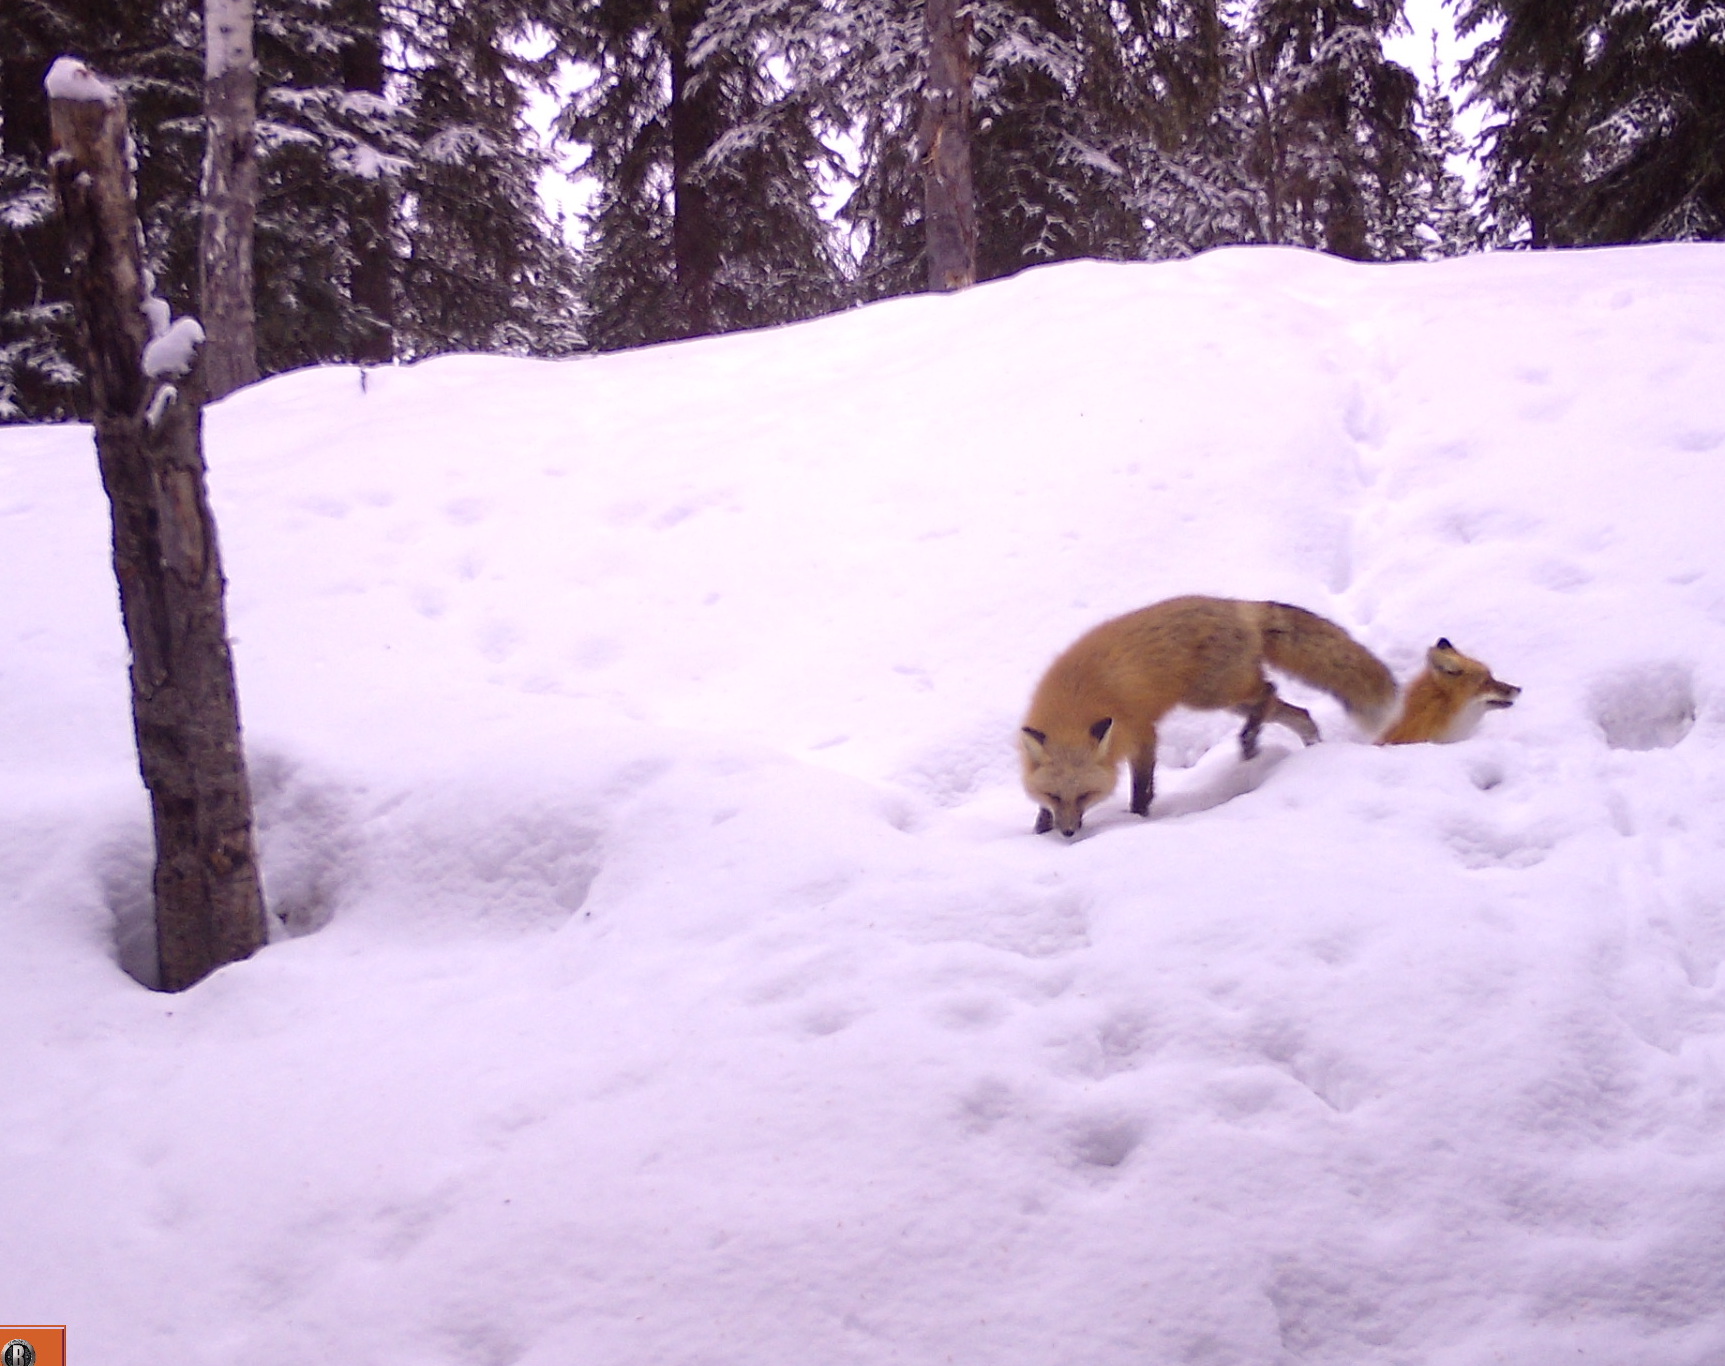 Two red foxes in a snowy landscape, one sitting in a hole with just its head showing